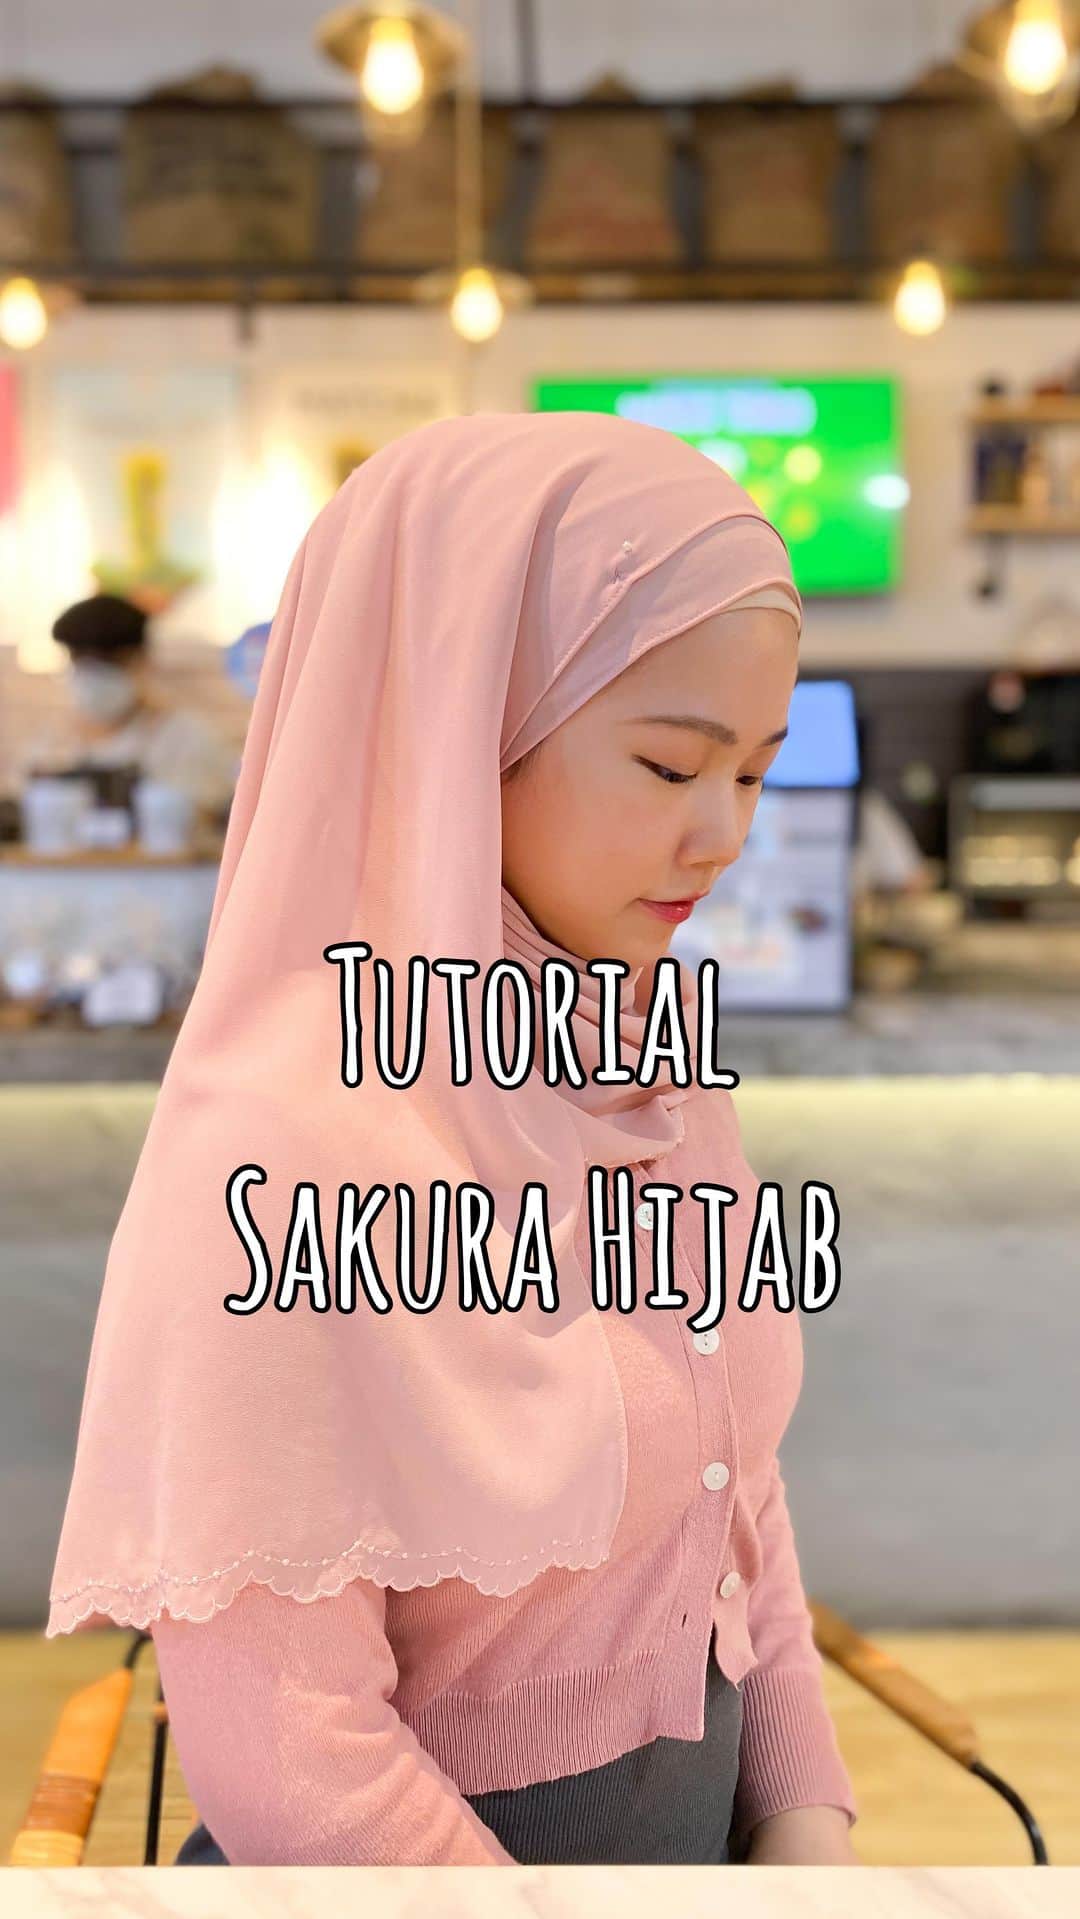 sunaのインスタグラム：「🌸Tutorial Sakura Hijab🌸  All Muslimah wearing hijab when they go out. In this account, a Japanese converted Muslimah will show you  🌸Tips to make Kirei & Kawaii with Hijab 🌸Styling that you can do in 1 minute  #hijab #hijabstyles  #hijaberstyle #hıjabfashion  #hijabtutorial #hijabinspiration  #hijabi  #fashionmalaysia #muslimahfashionistawear  #malaysiamuslim #cantikcantik  #cantikhijab #hijabmurah  #hijabcollection  #comel #hijabmasakini   #igmalaysia  #muslimmalaysia  #malaysia  #malaysiaculture #malaysiastyle  #malaysiafashion  #malaysianbeauty  #malaysiancantik  #muslimahcantik  #muslimawear  #muslimahhijab #muslimahfashion  #muslimahoutfit  #muslimahhijab  #muslimahootd」